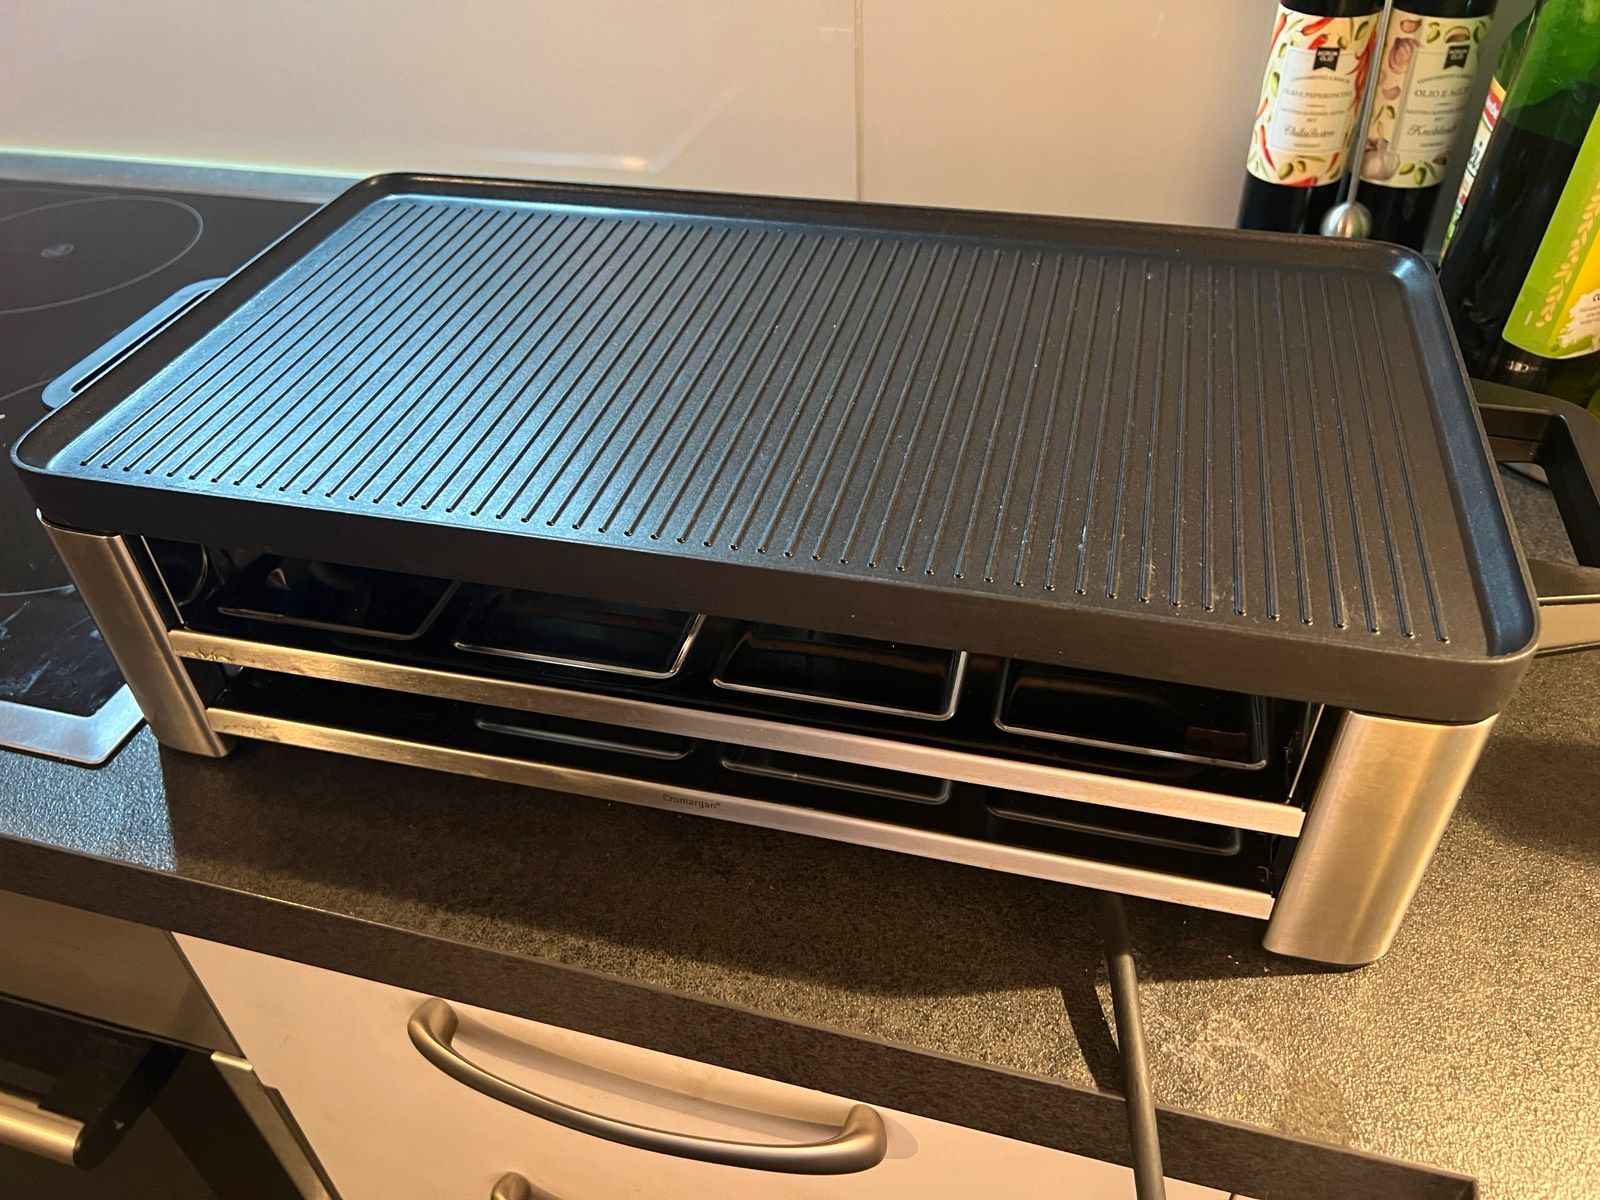 WMF Lono Raclette Grill Test